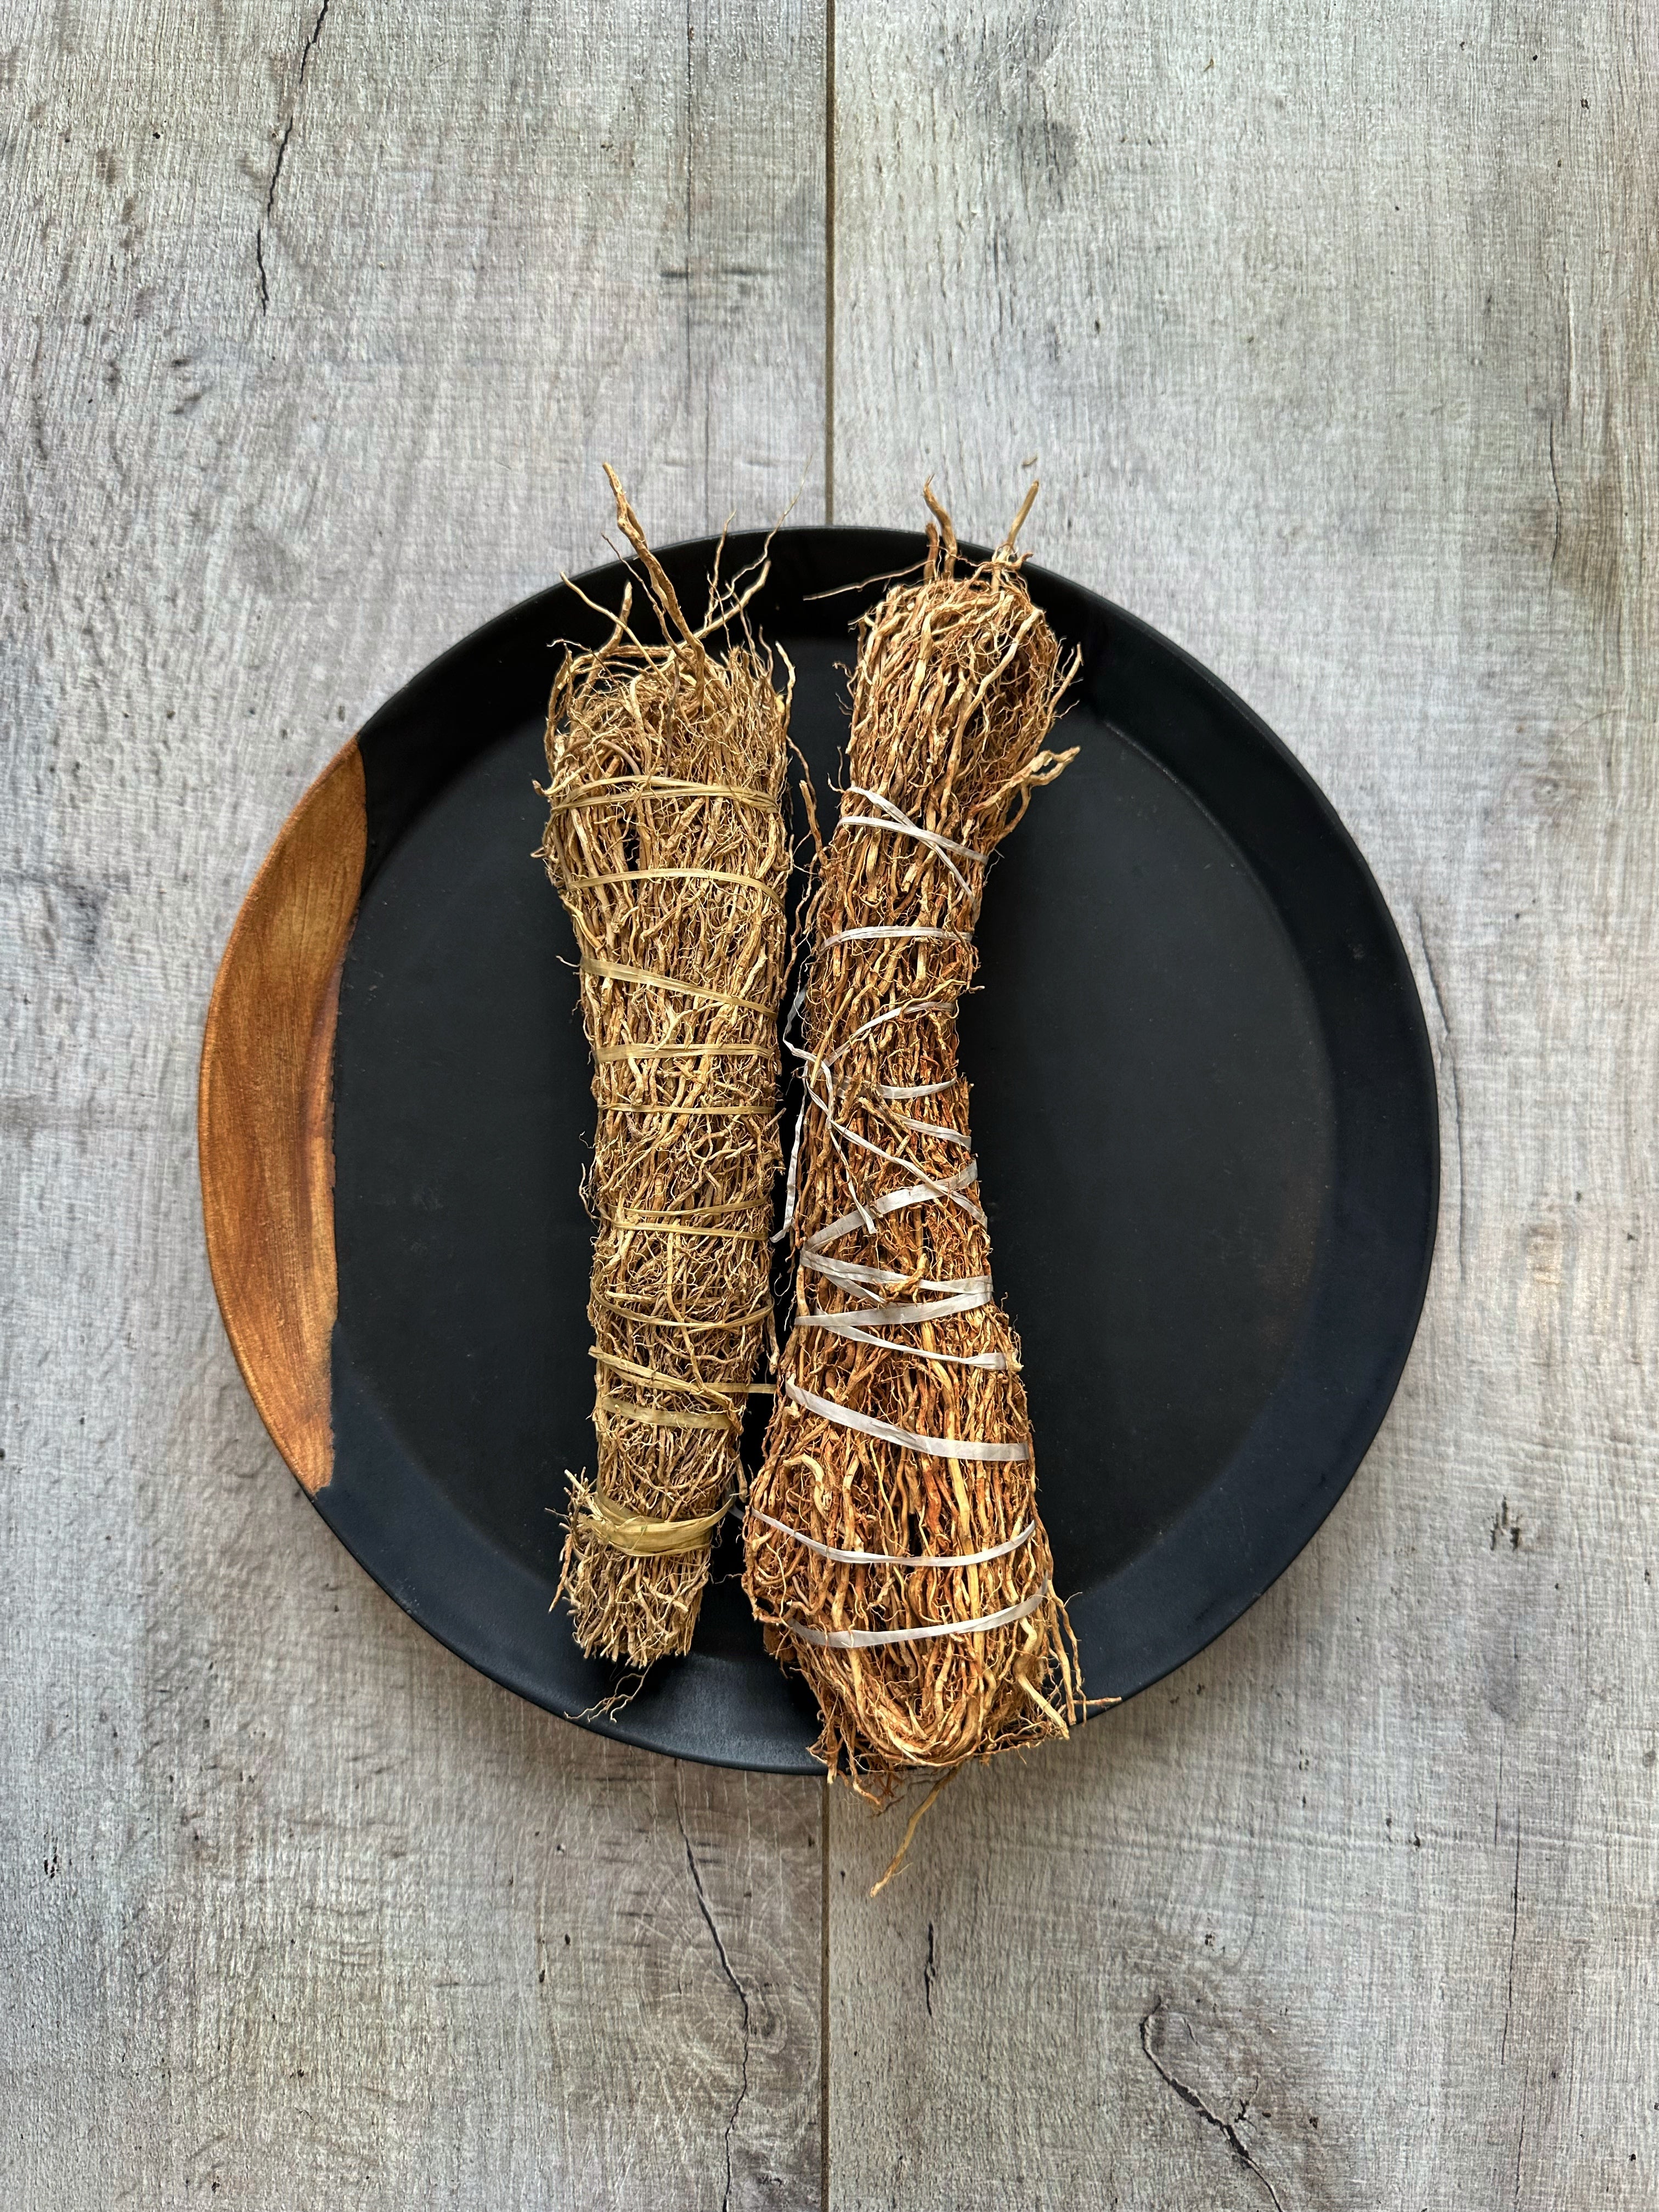 Patchouli Root (Pogostemon patchouli) - Witching Herbs